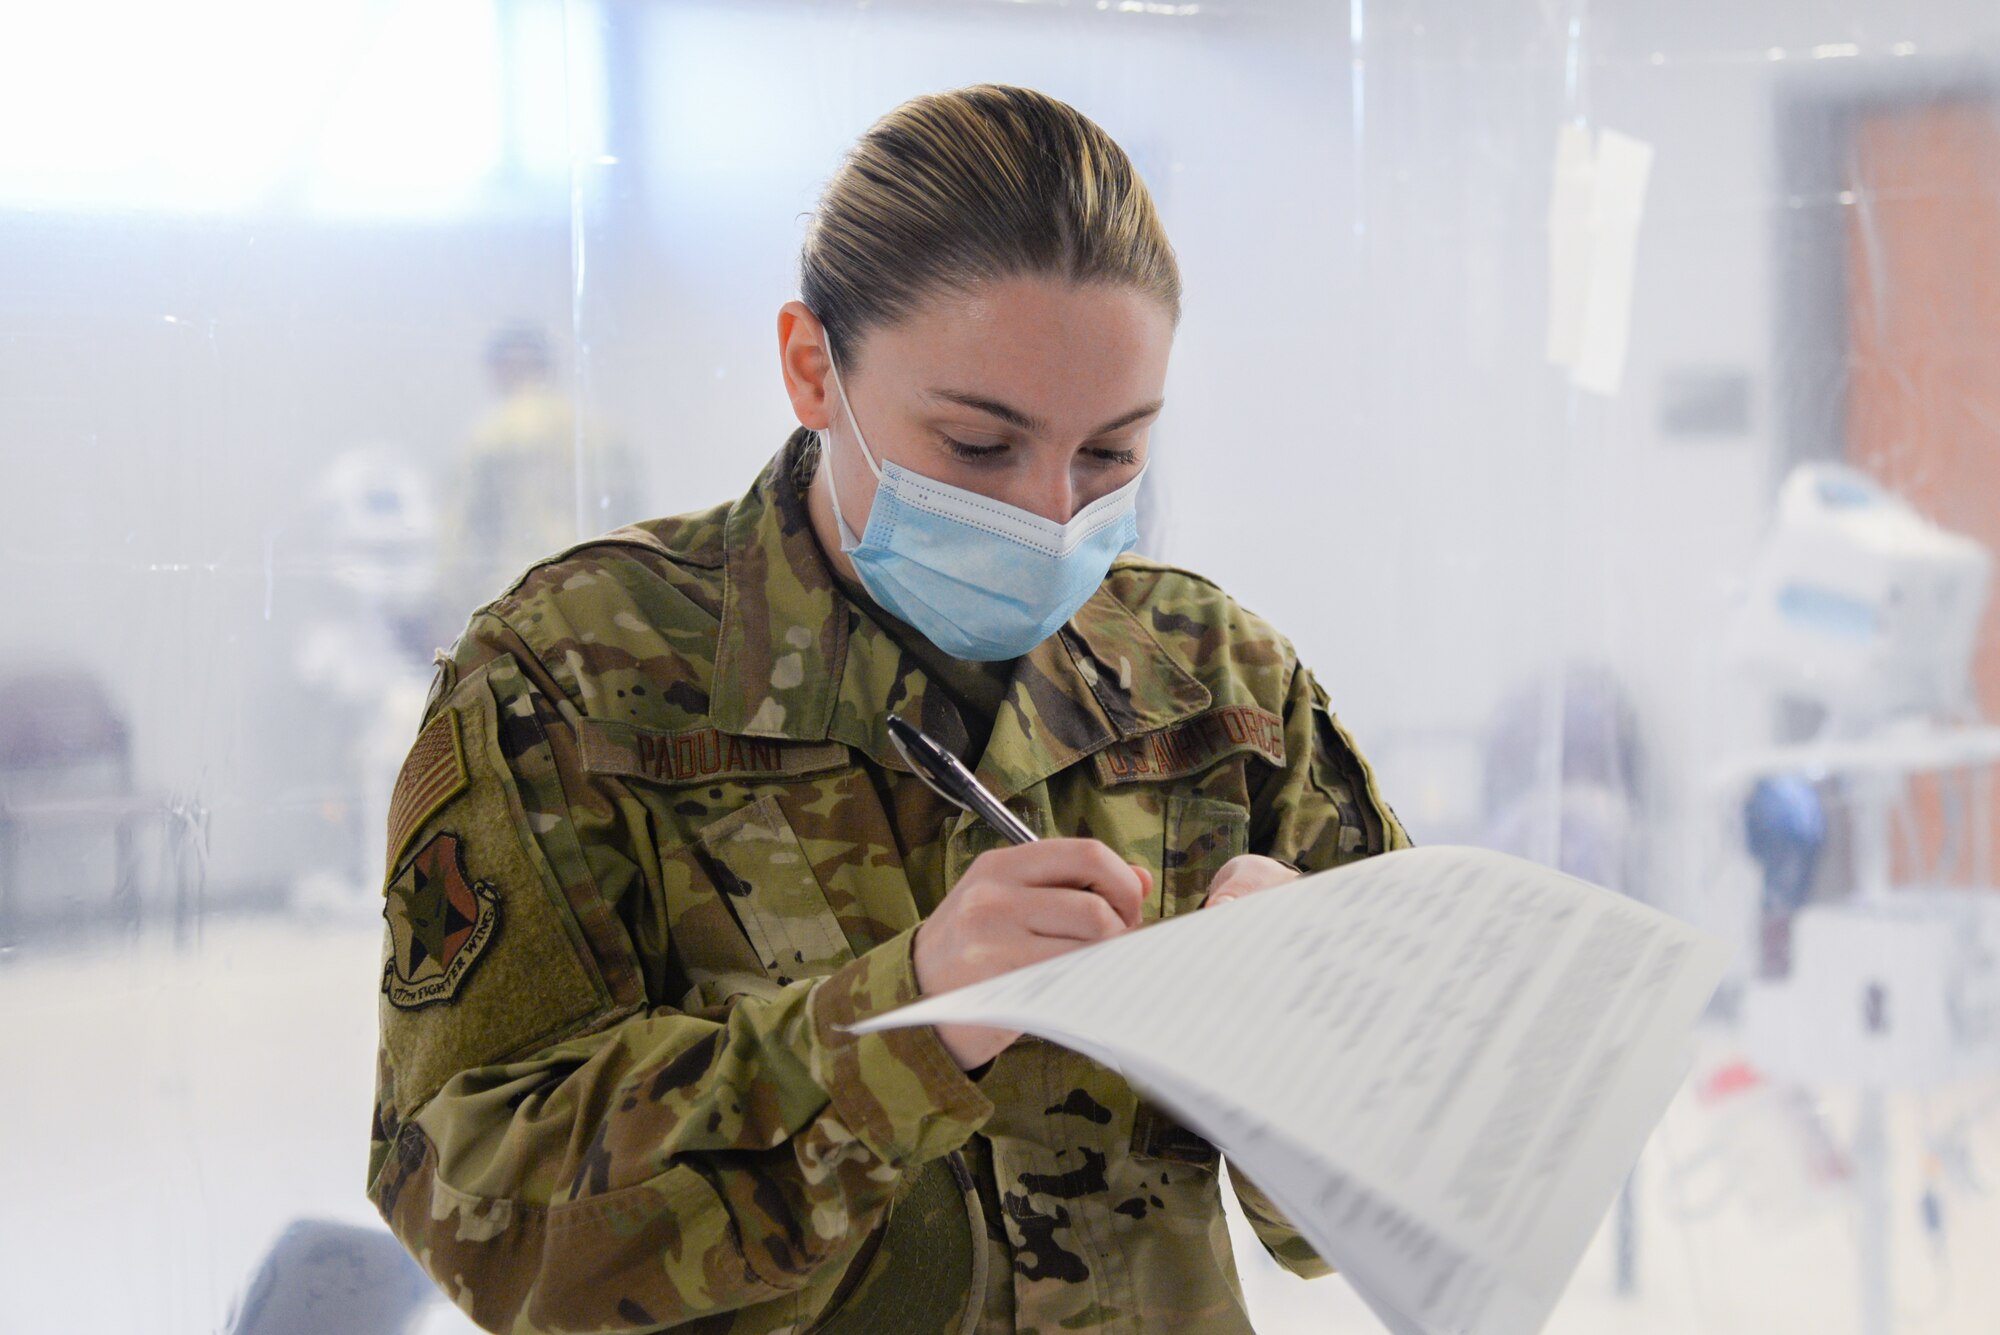 U.S. Air Force Airman lauren A. Paduani, 177th Logistics Readiness Squadron traffic management office specialist, completes paperwork during her out-processing Jan. 13, 2021, at the New Jersey National Guard Base, Sea Girt, N.J. The out-process included a briefing, medical examinations and a sit-down with administration. (U.S. Air National Guard photo illustration by Airman 1st Class Hunter Hires)